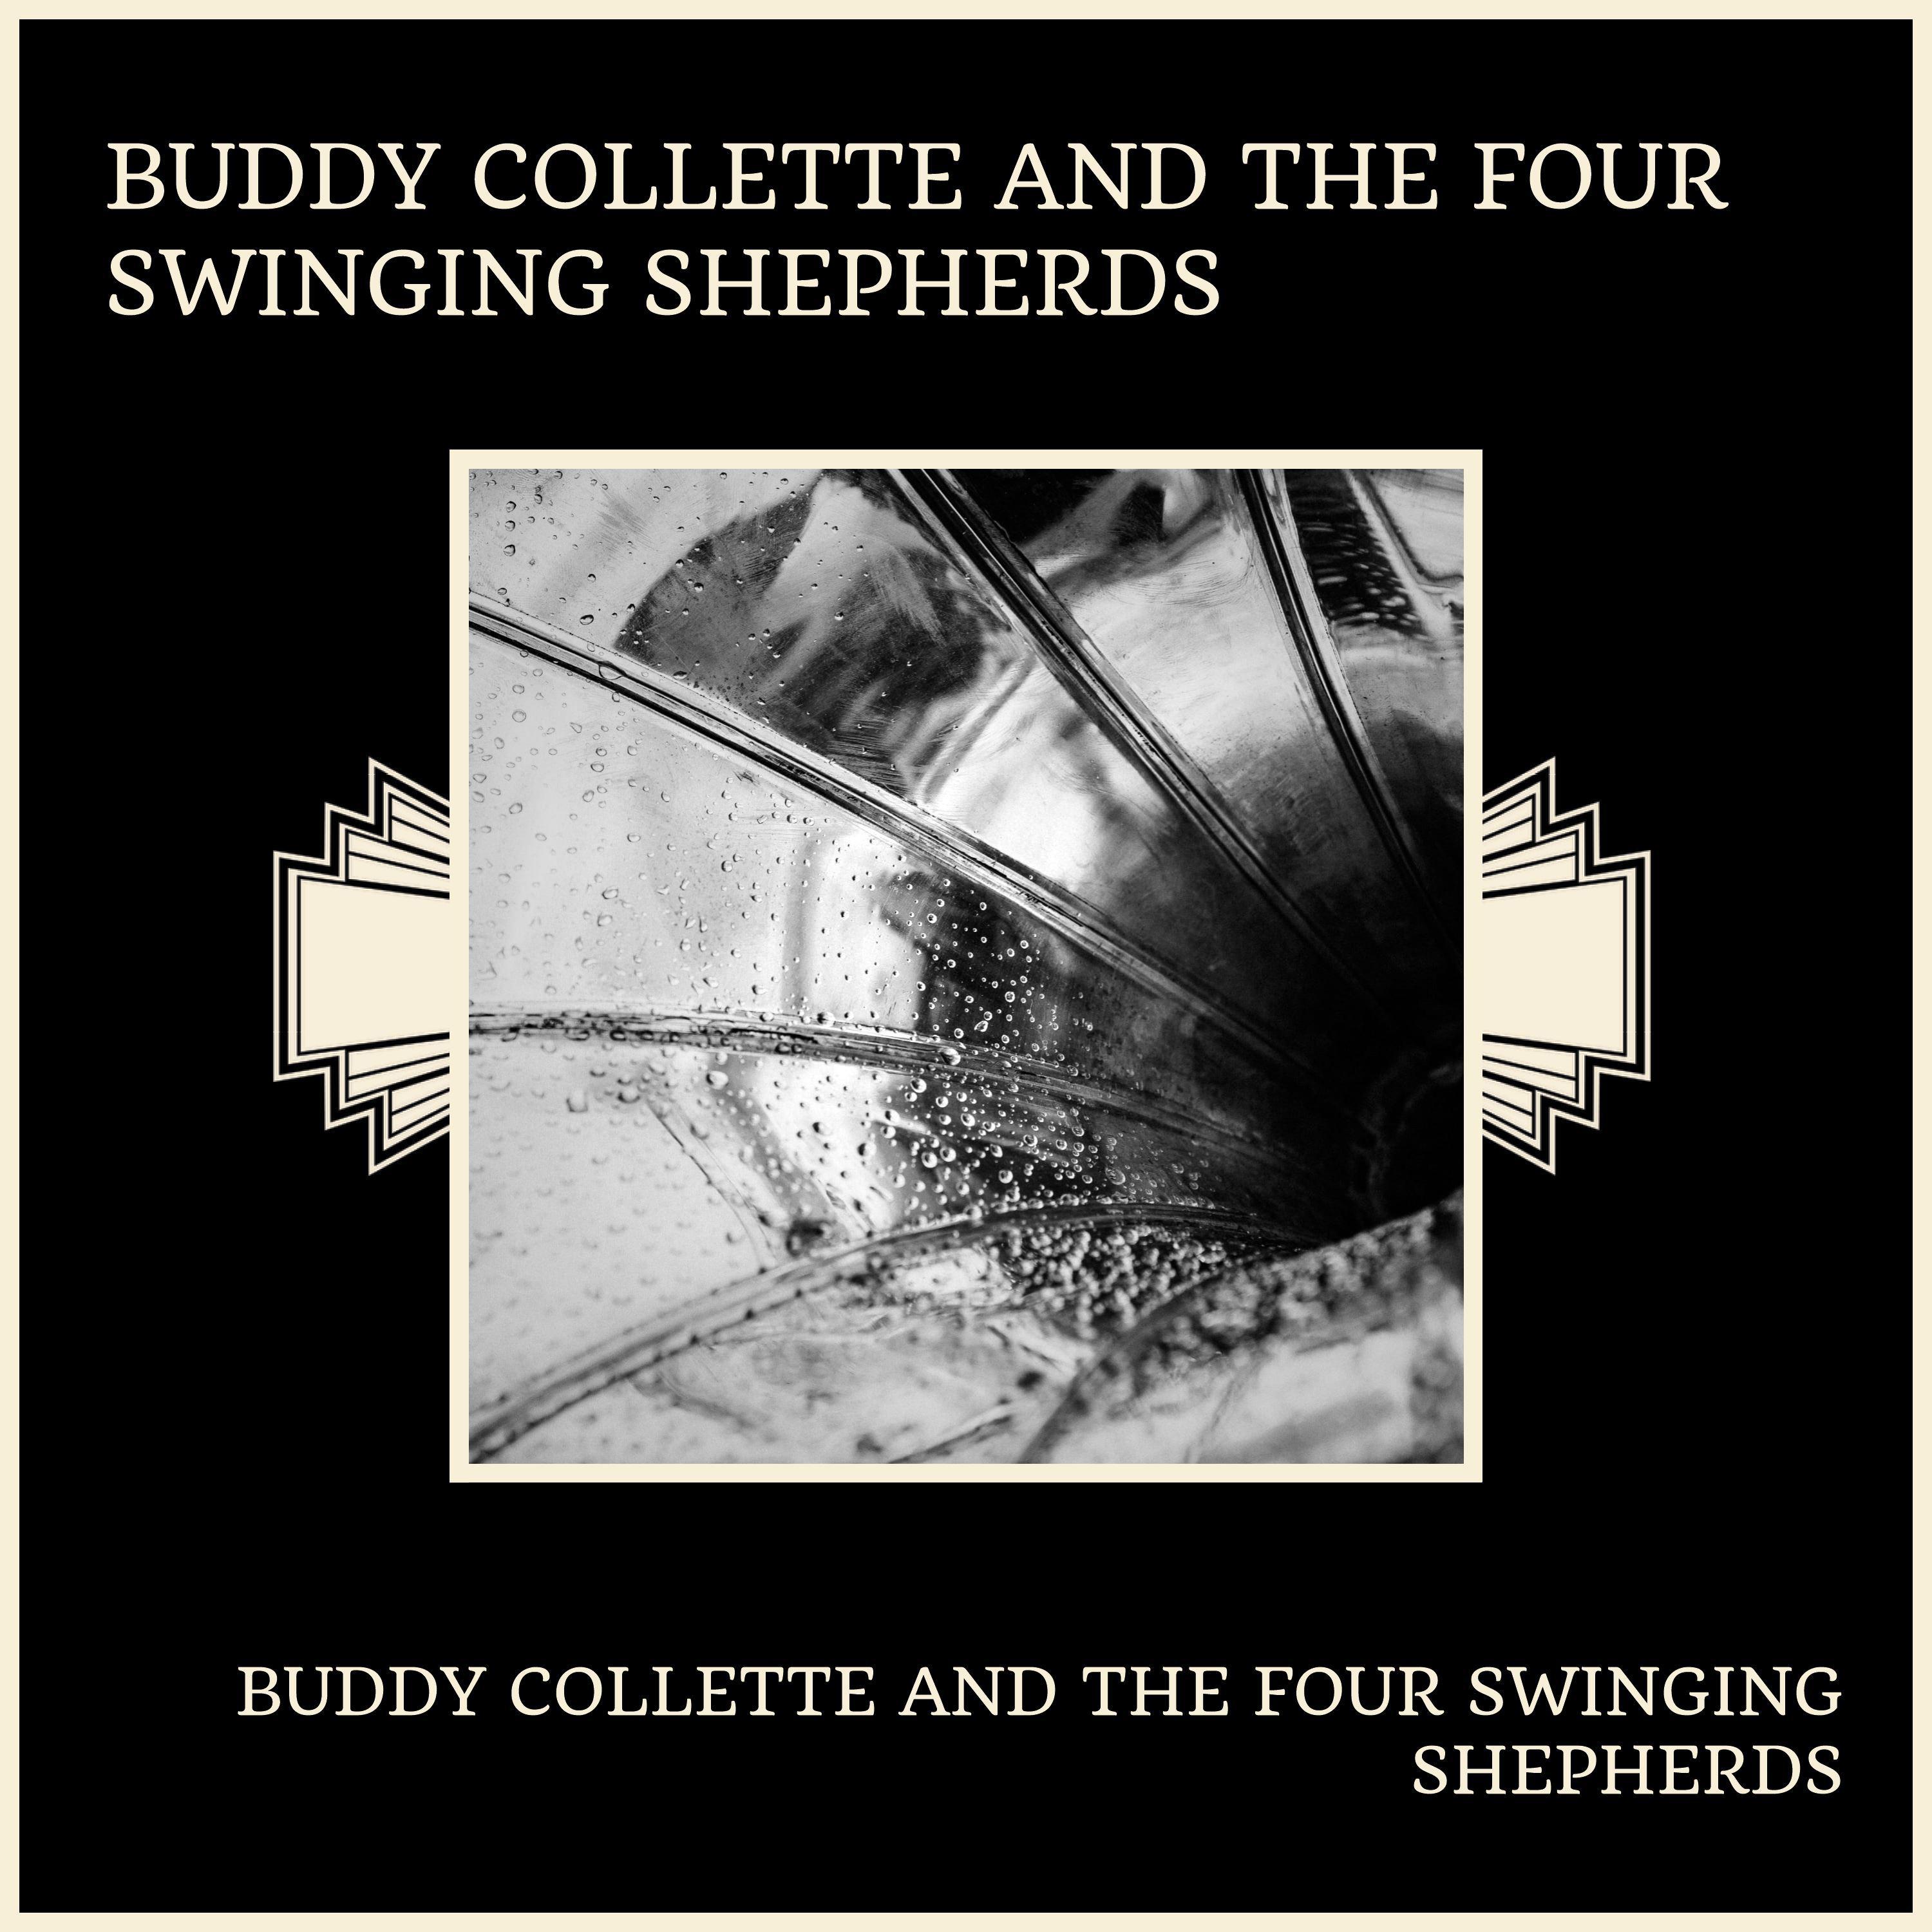 Buddy Collette And The Four Swinging Shepherds